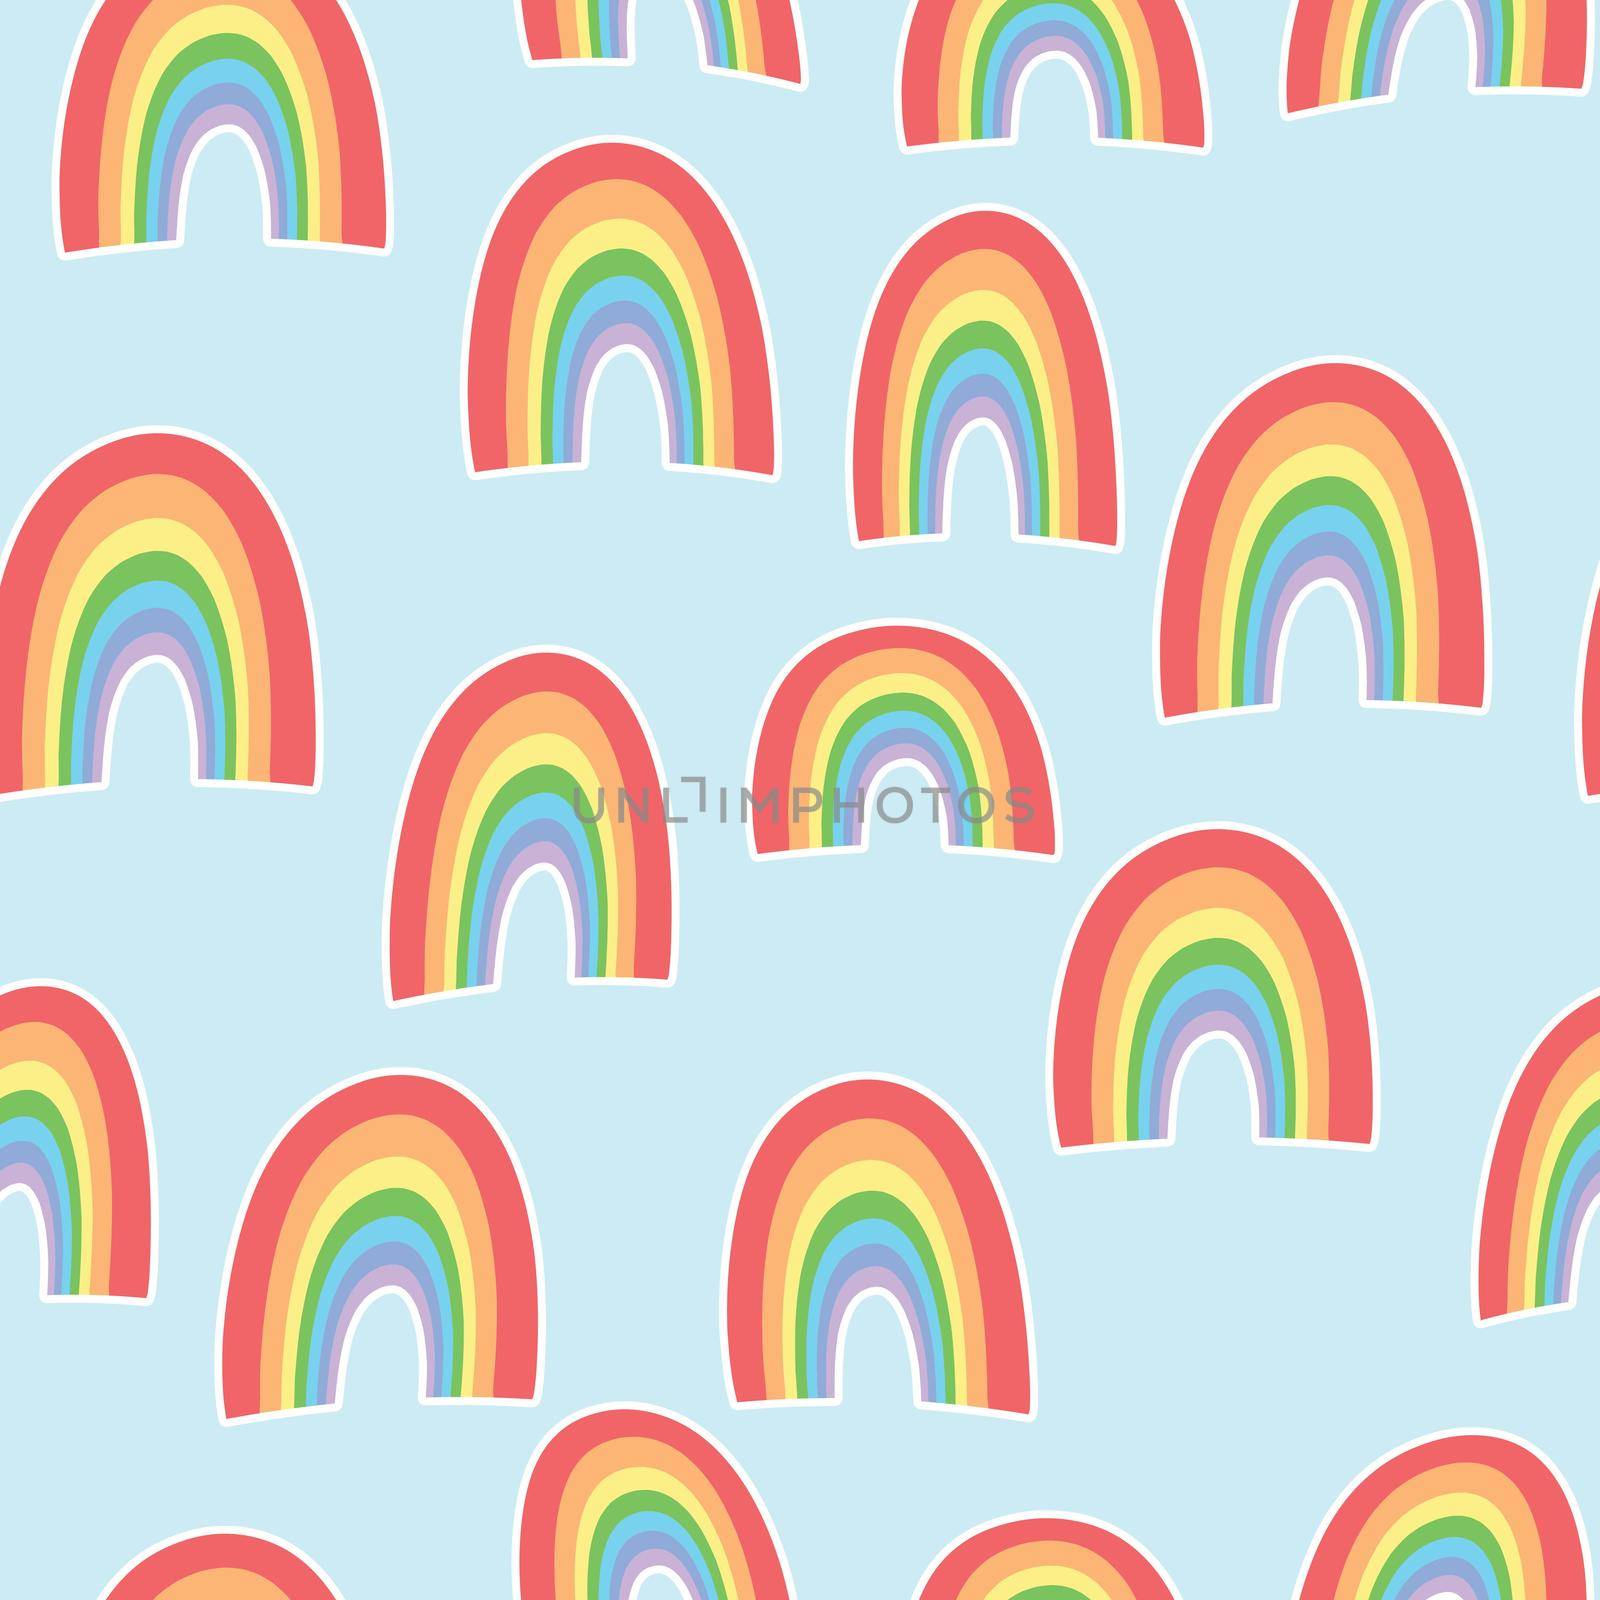 Trendy seamless pattern with colorful rainbow on color background. Design for invitation, poster, card, fabric, textile, fabric. Cute holiday illustration for baby. Doodle style.